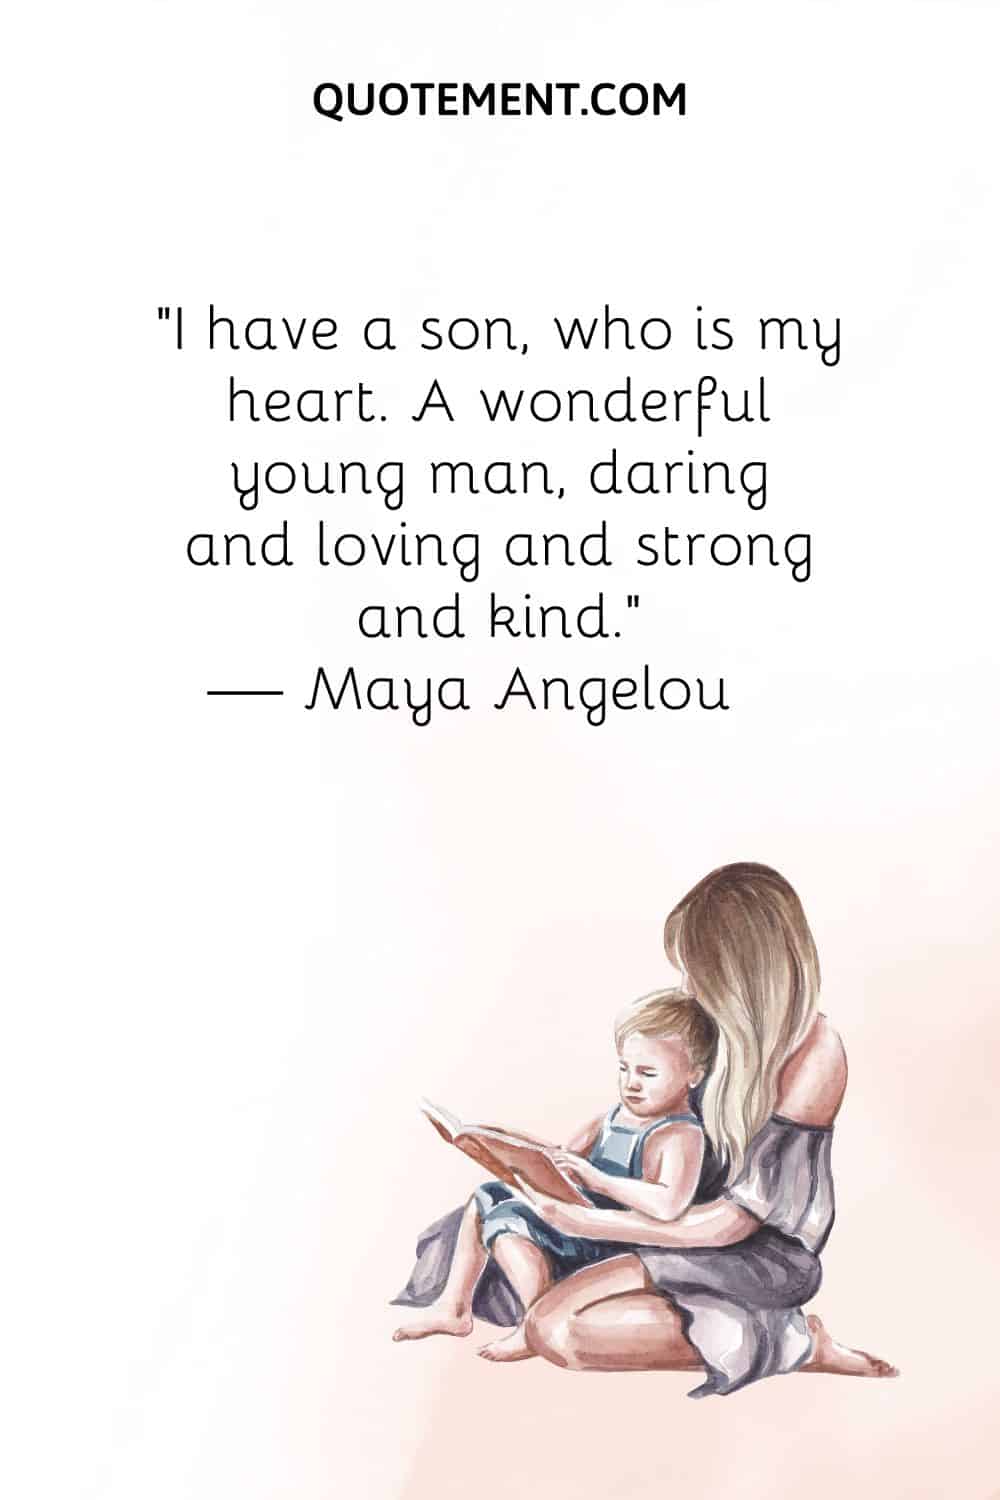 mom and son reading image representing my son is my strength quote